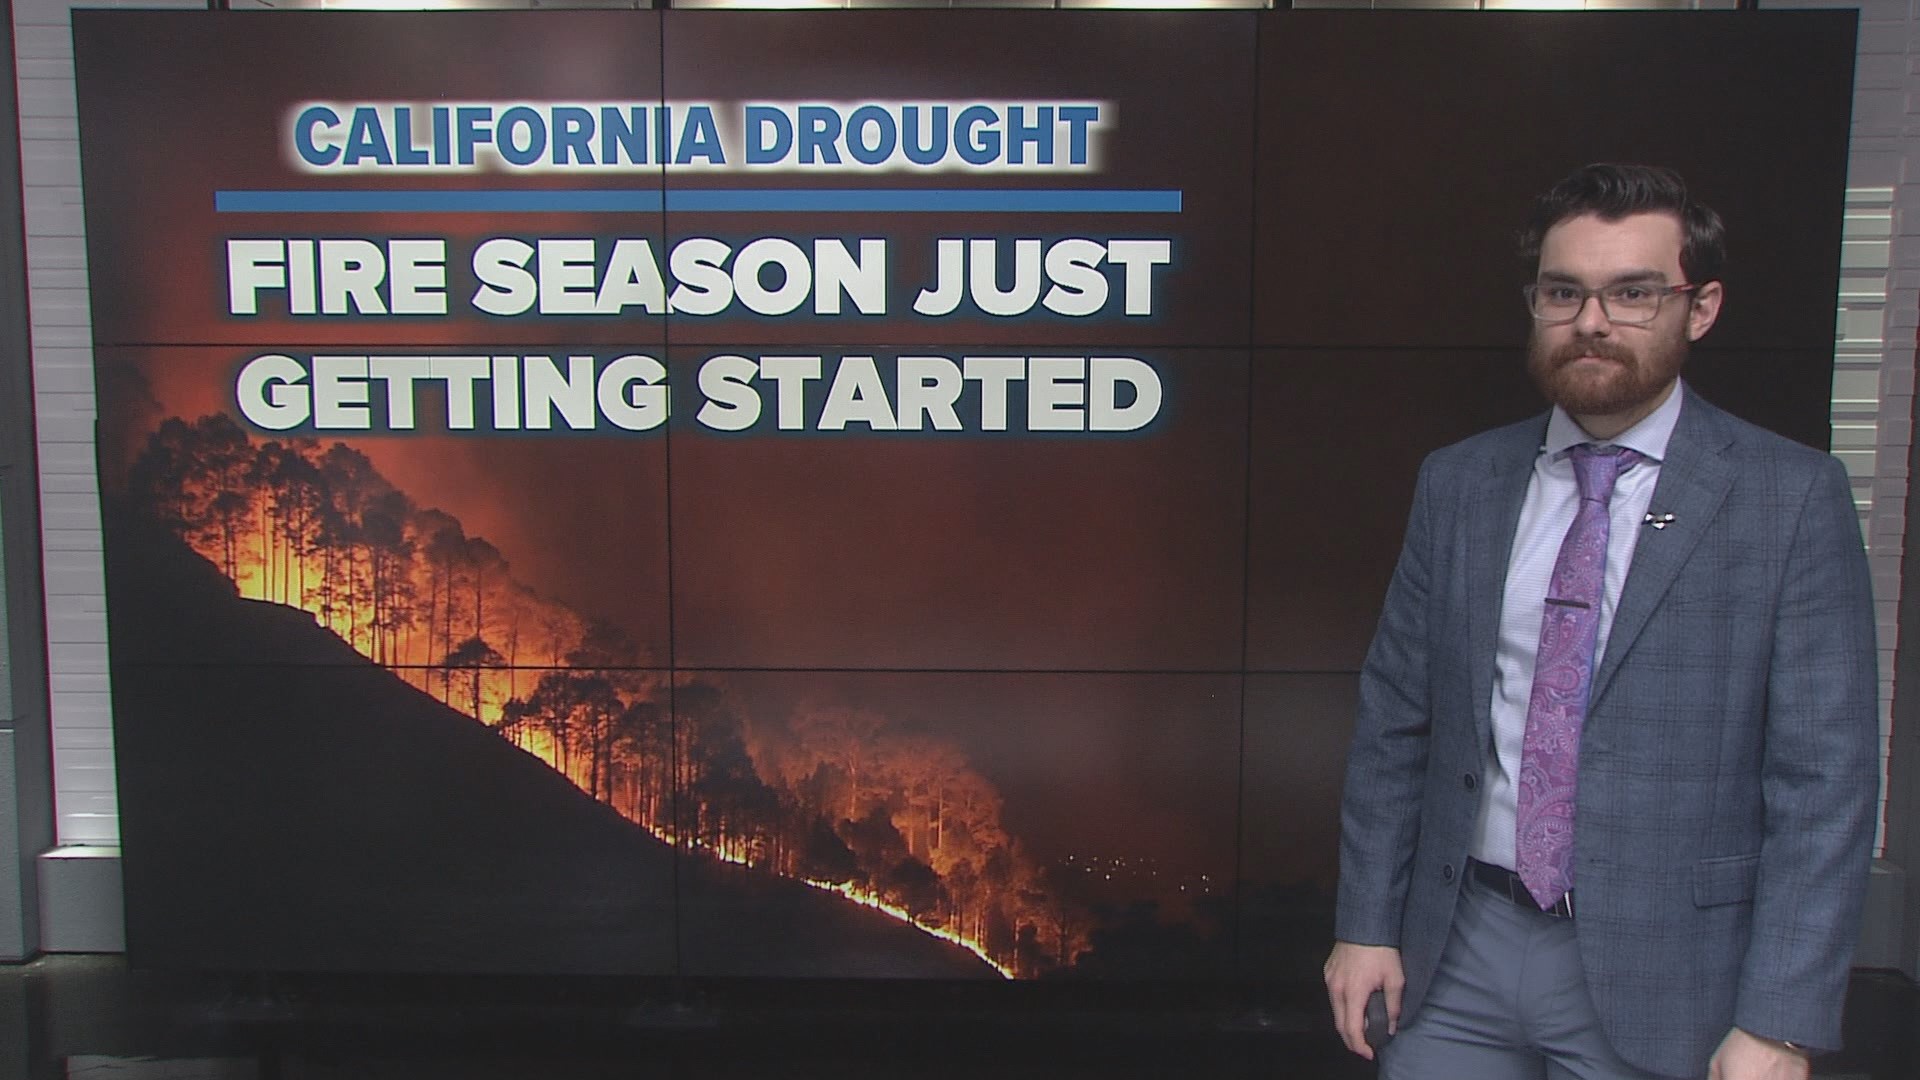 Tropical Storm Hilary wiped out remaining SoCal drought. Meanwhile, the worst of fire season may still be yet to come as north winds become more prevalent.